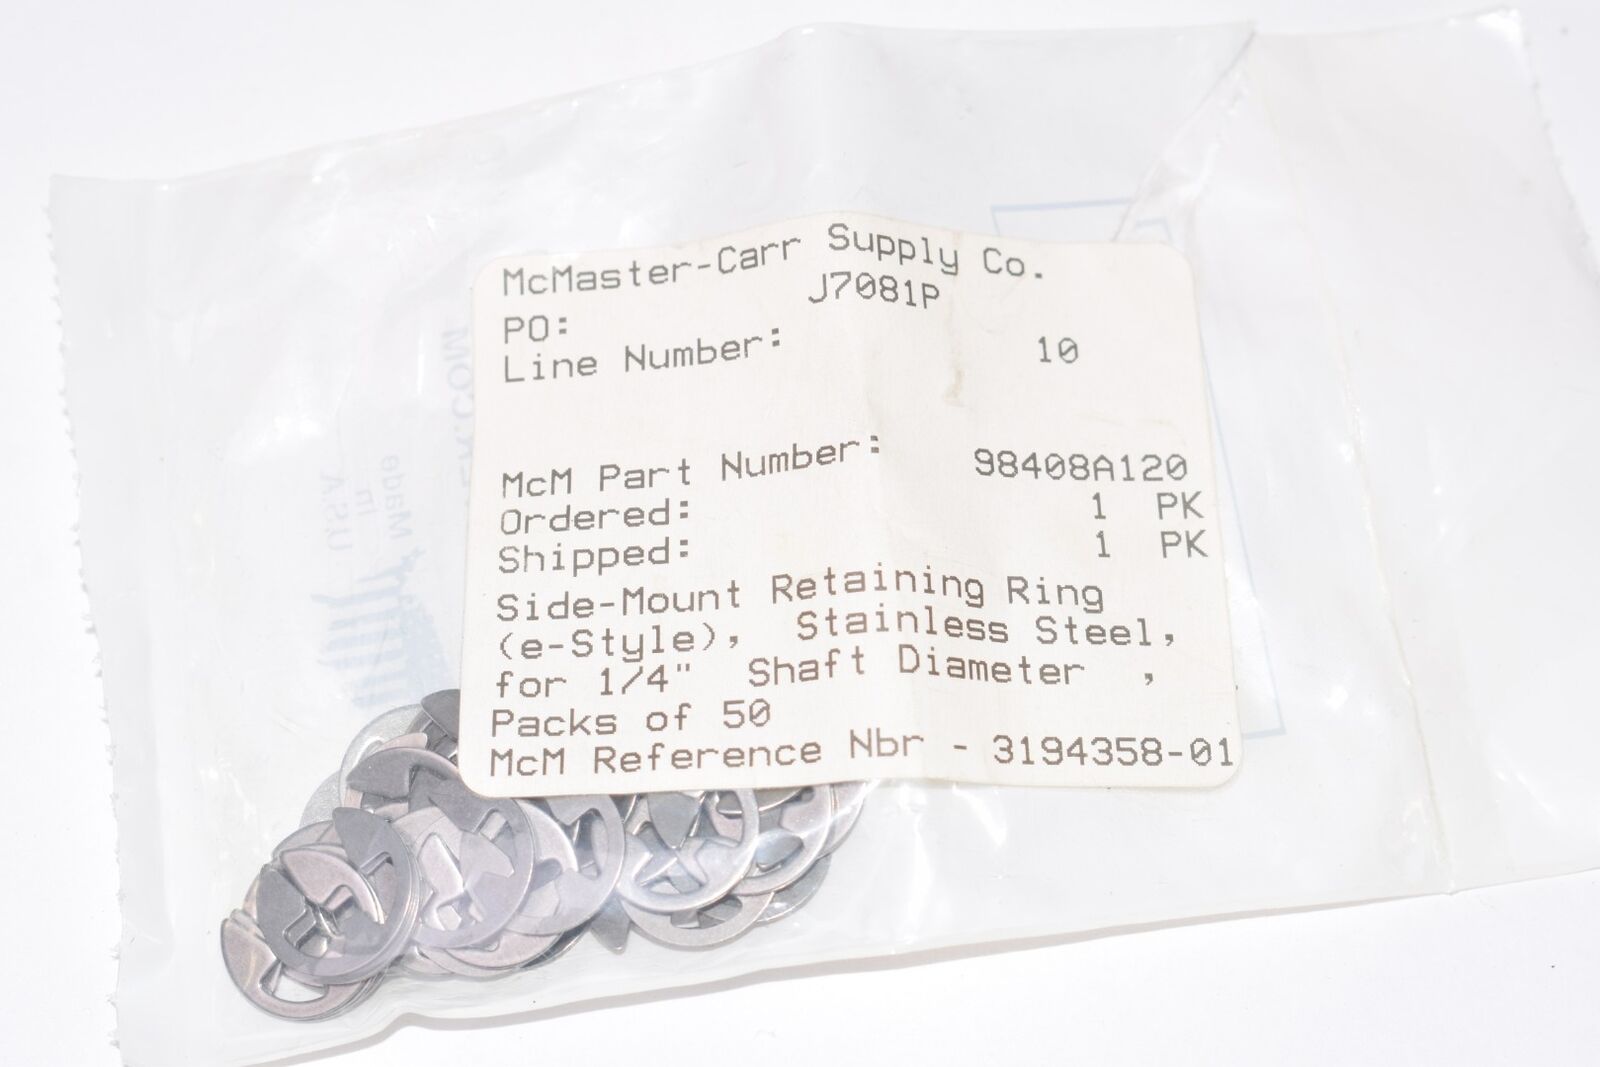 Lot of NEW McMaster 98408A120 Side Mount Retaining Rings, E-Styl